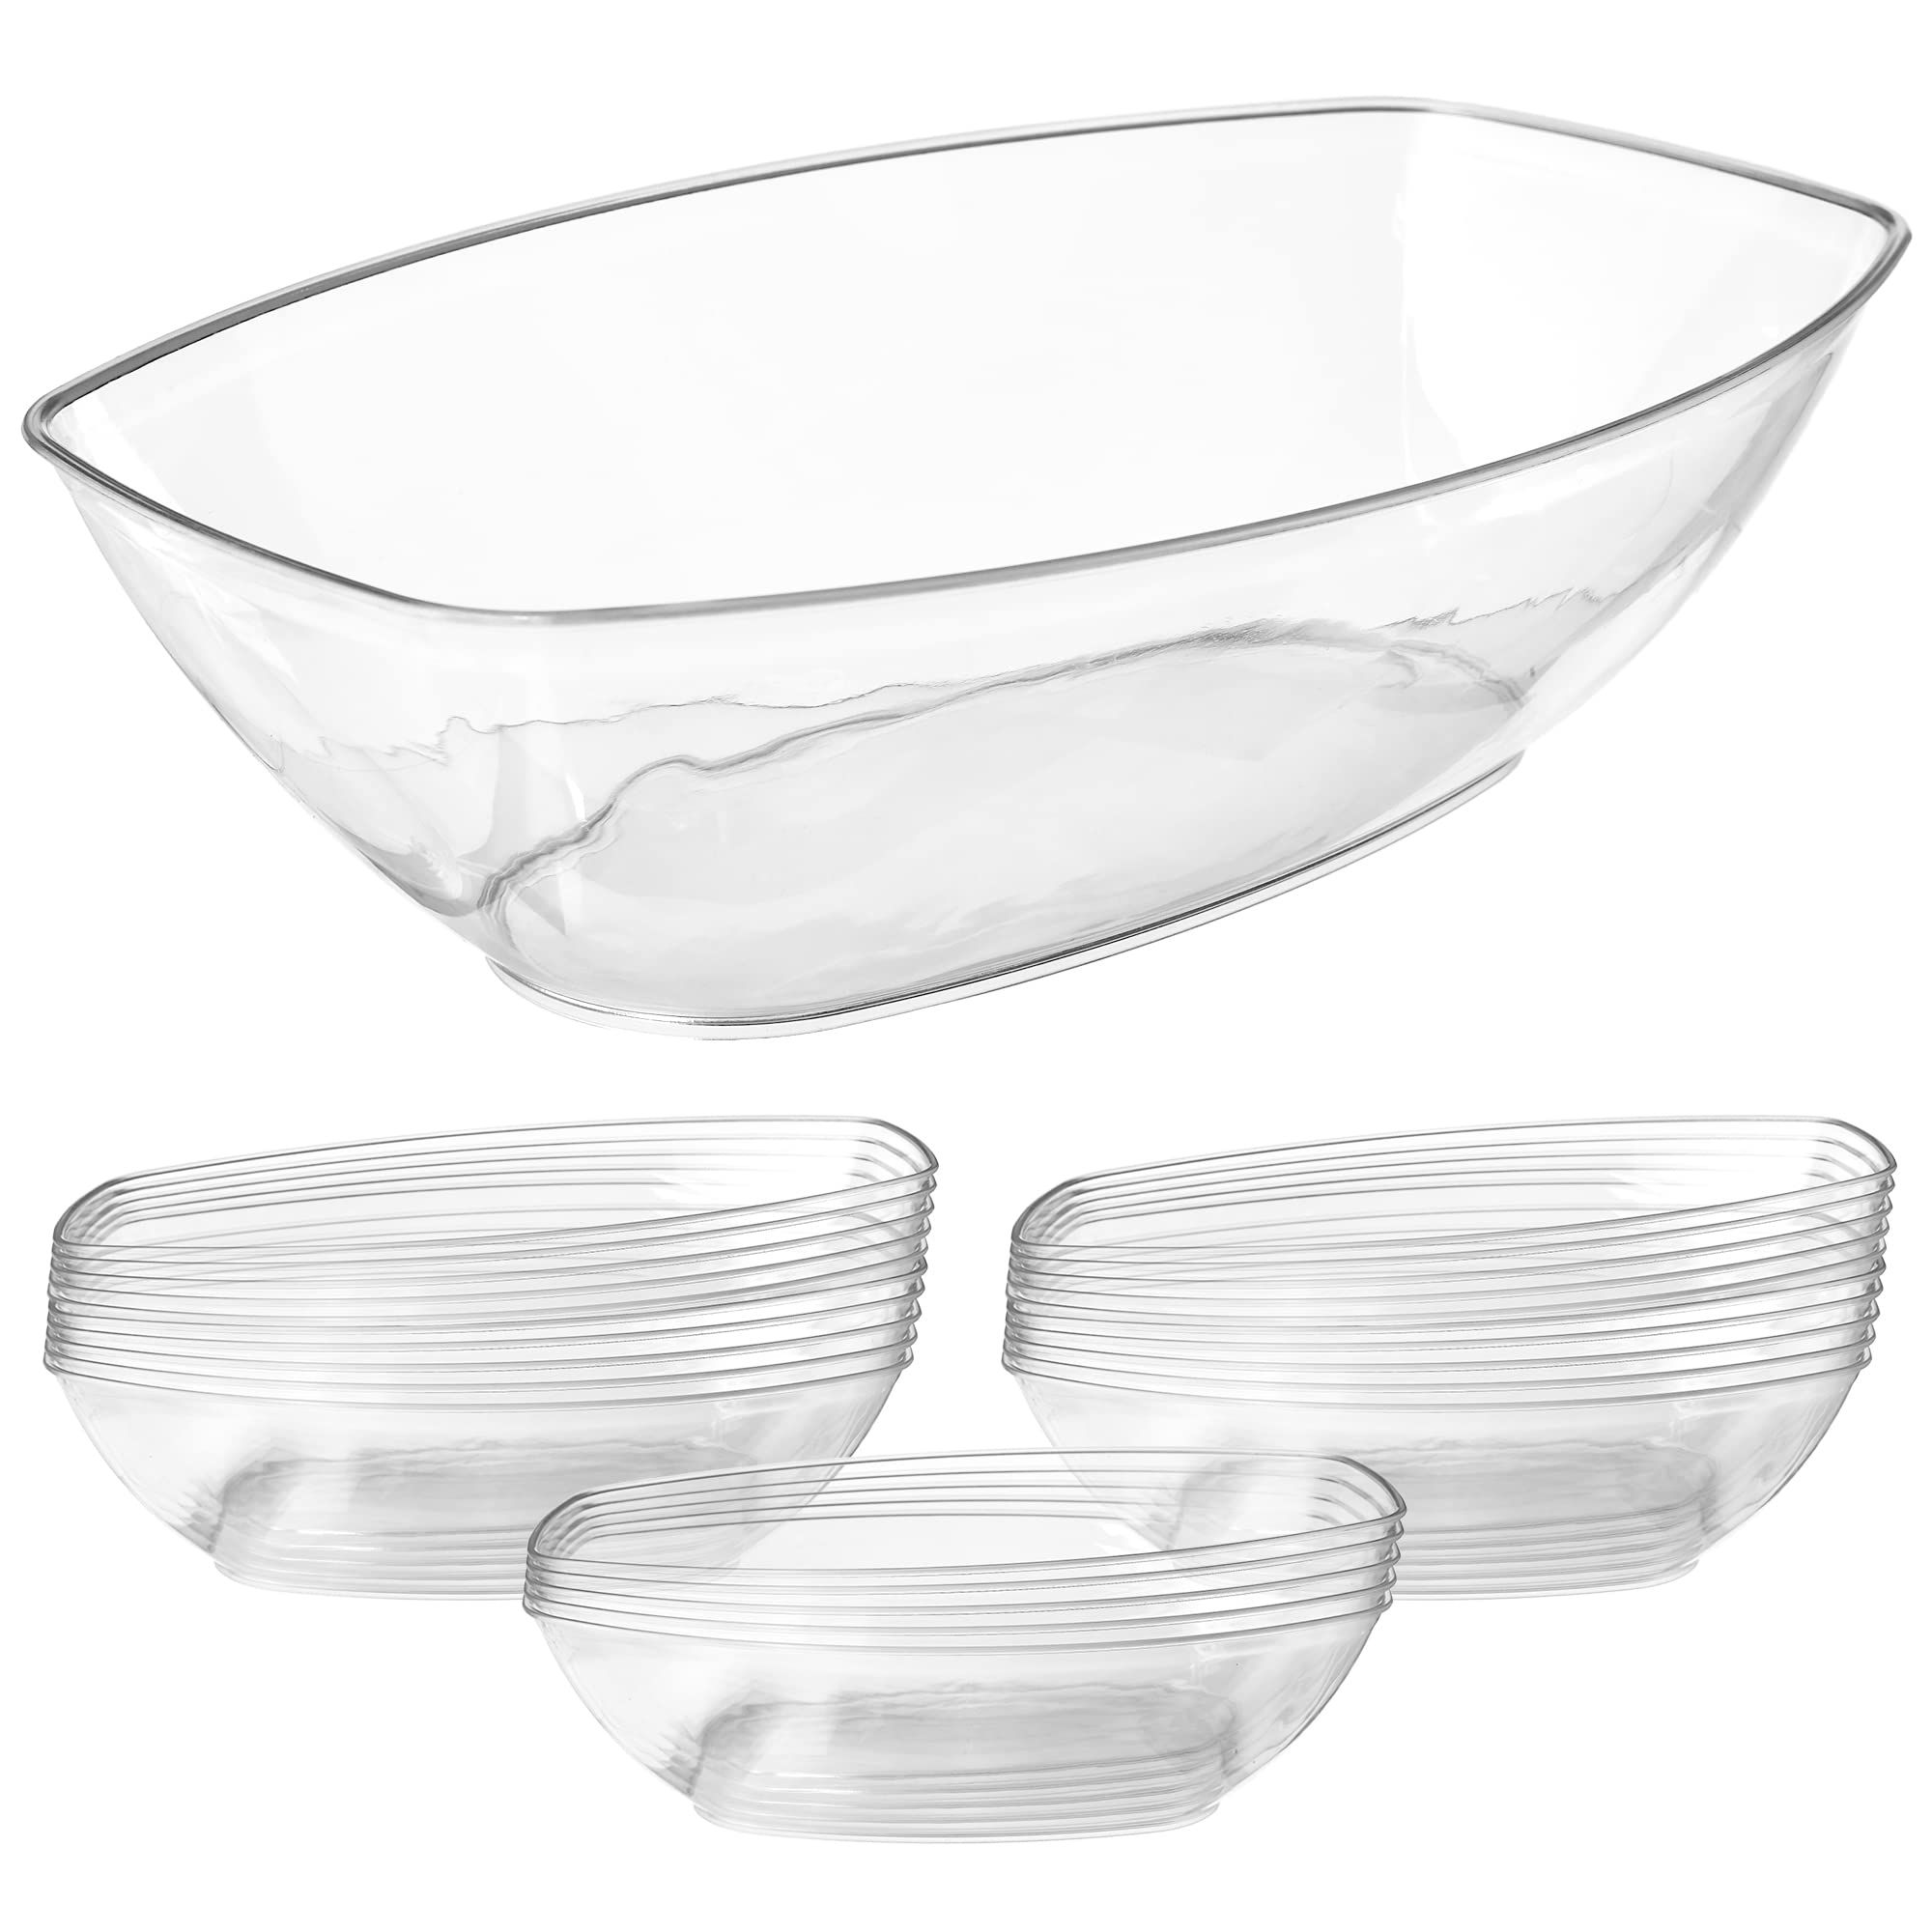 64 oz Salad To-Go Containers - Clear Plastic Disposable Salad